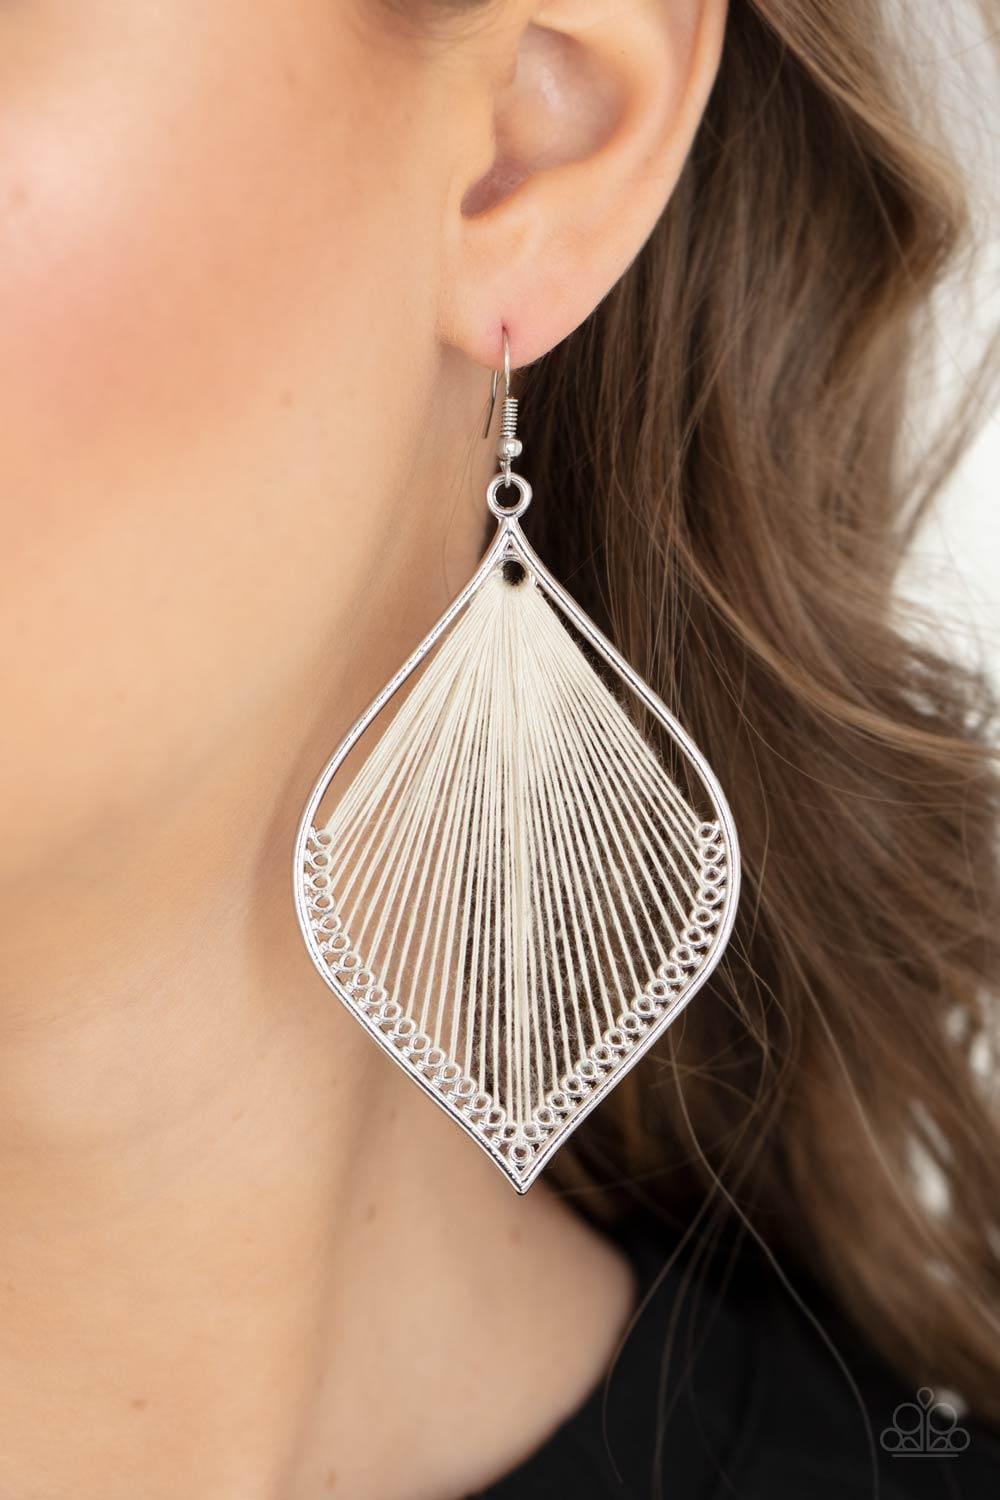 Paparazzi Accessories - String Theory - White Earrings - Bling by JessieK